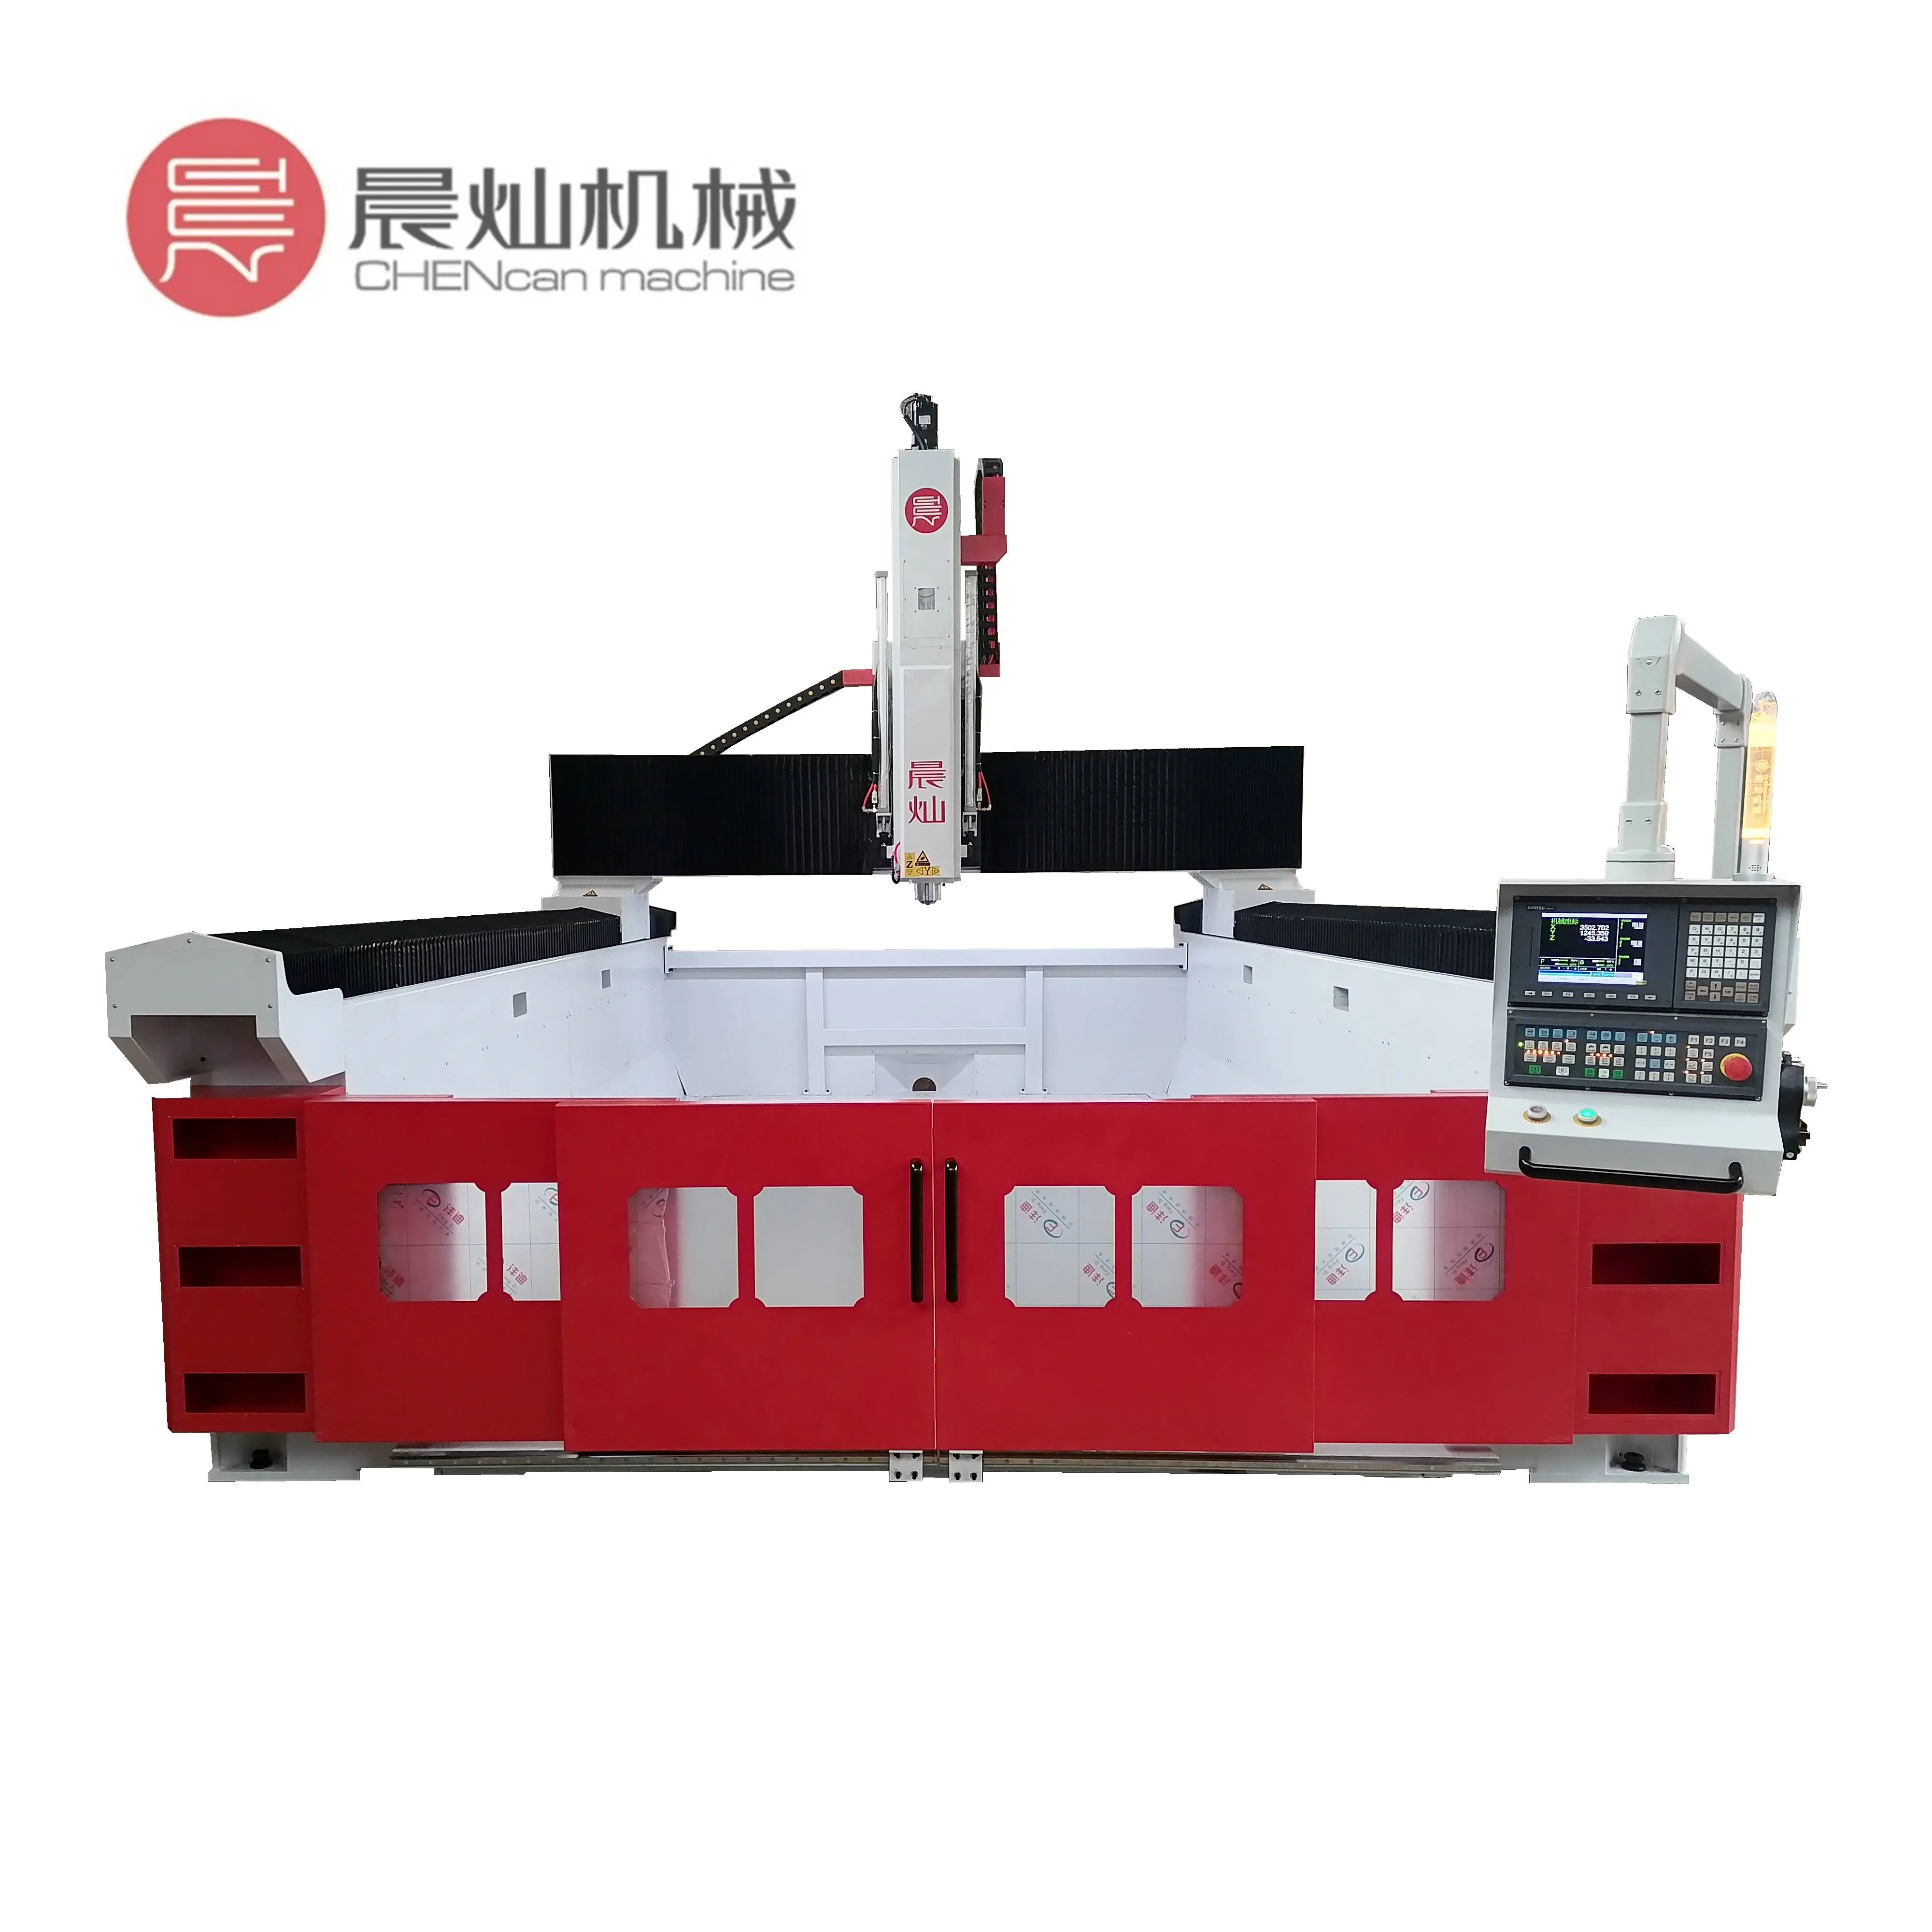 cnc foam boring molding mold making cnc router machine for milling service cnc blocks plastic products Mould opening machine